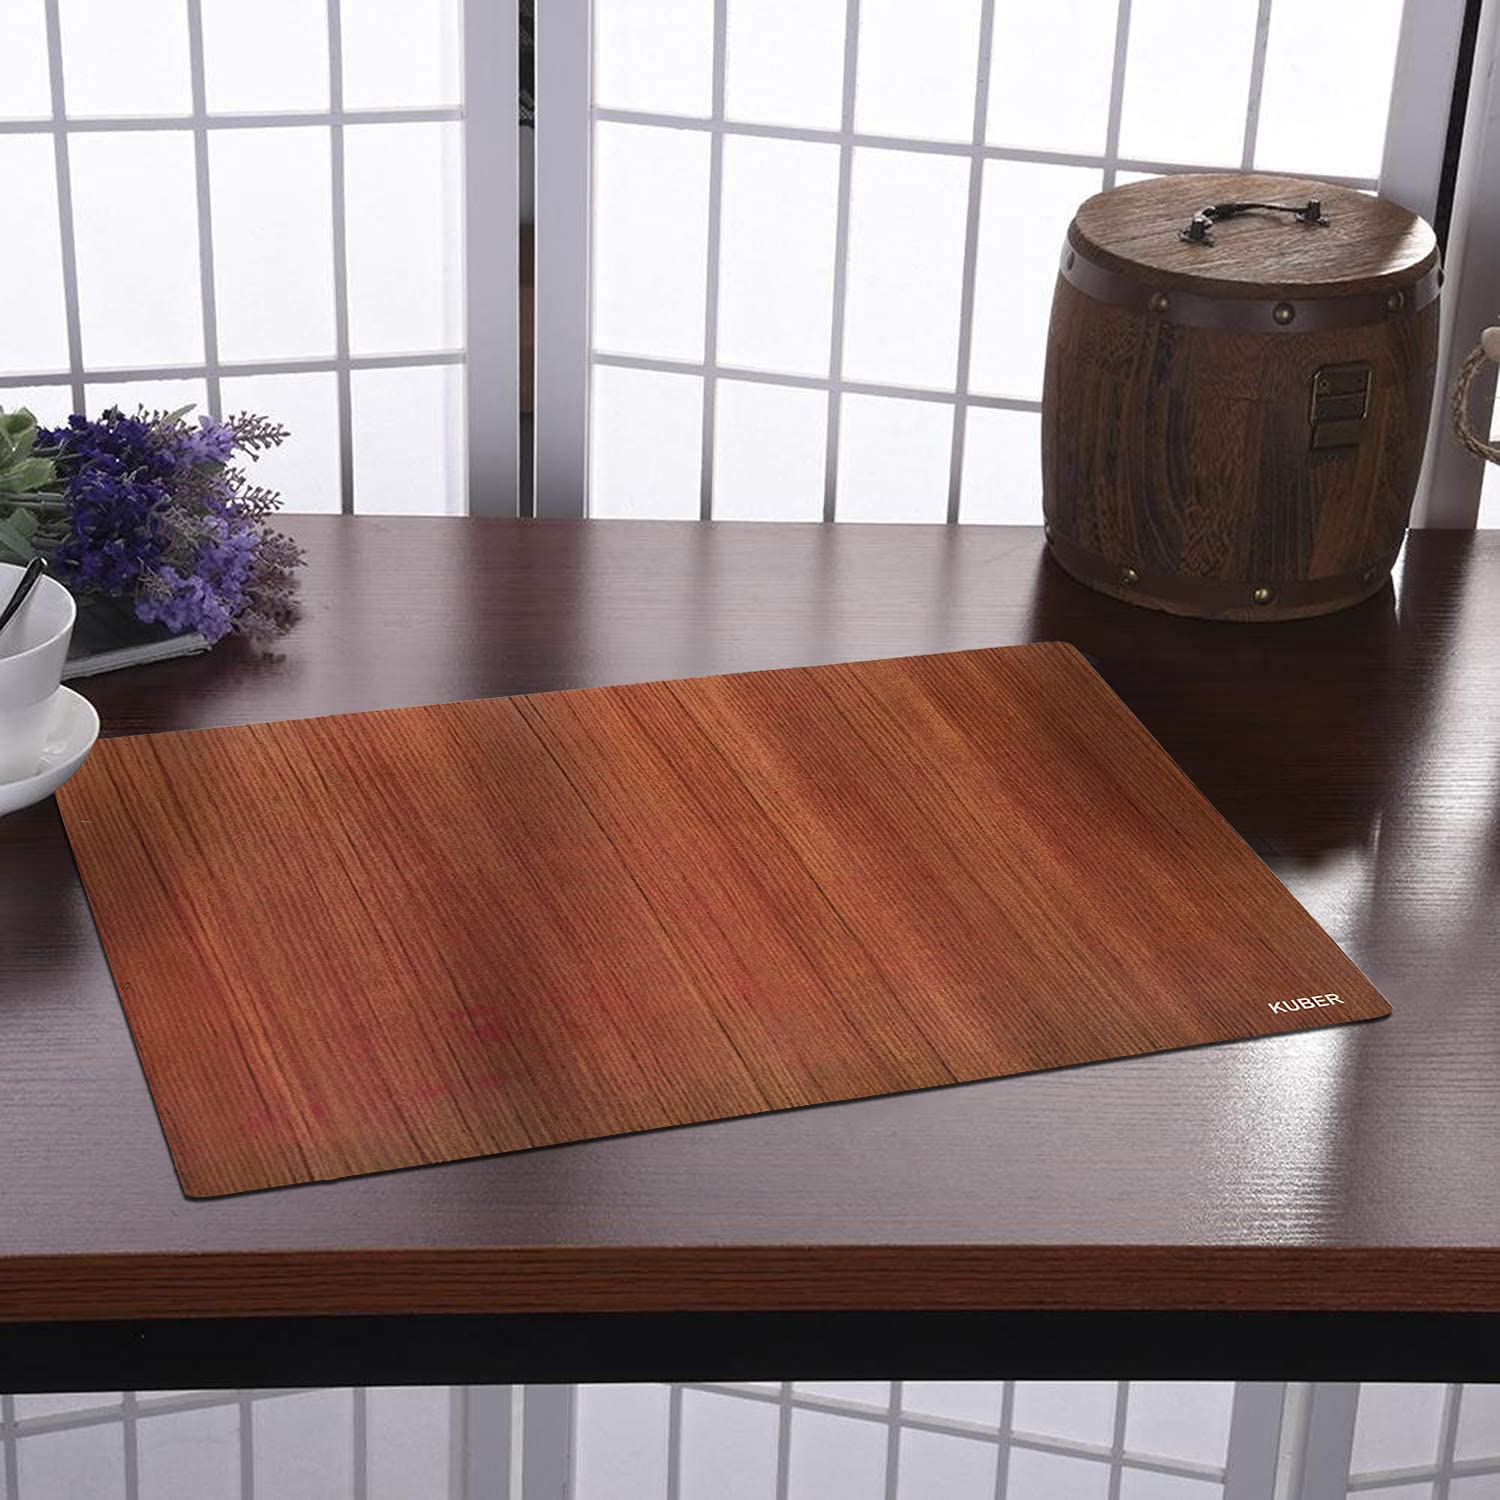 Kuber Industries Lining Design 6 Pieces PVC PVC 6 Piece Dining Table Placemat Set,Brown, Standard (HS_37_KUBMART020141)